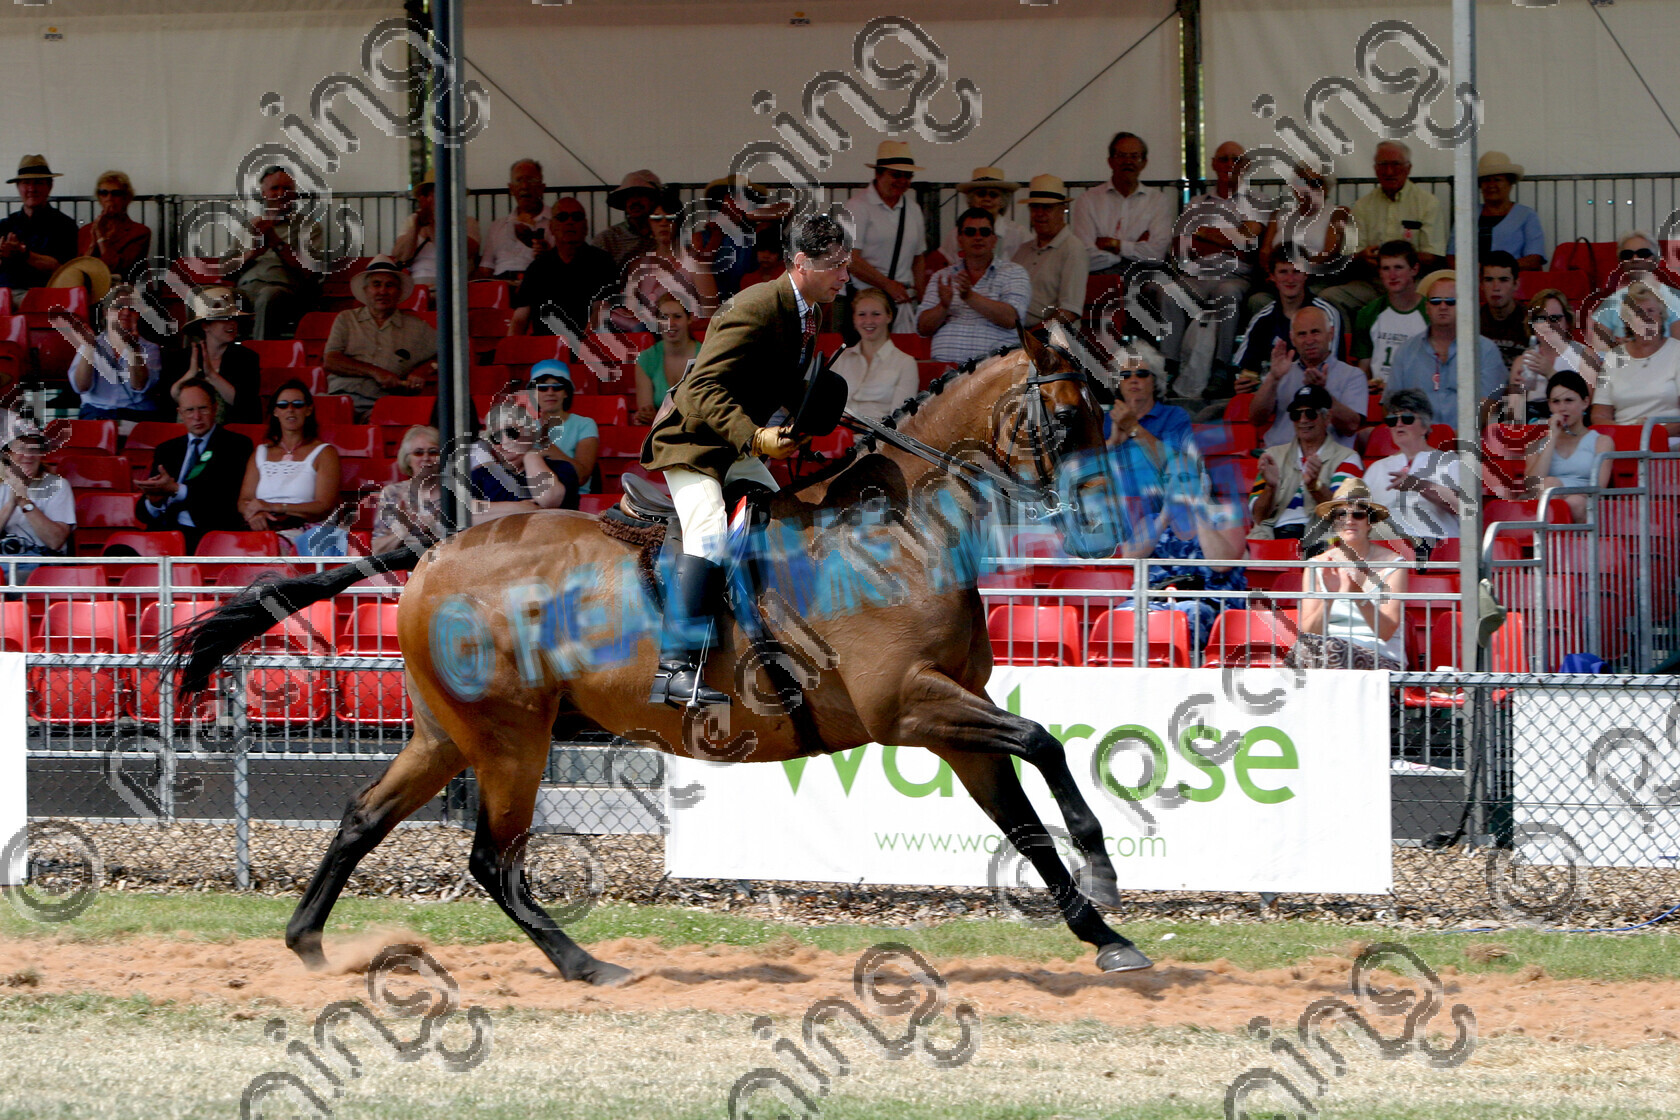 S06-32-M4-076 copy 
 Keywords: The Royal Show rosette rosettes prize winner horse pony show showing Tuesday 4 July 2006 championship champion ridden mounted gallop galloping action moving flat 76 Classic Gold II ridden by Robert Walker, Heather McLoy Middleweight Hunter bay gelding